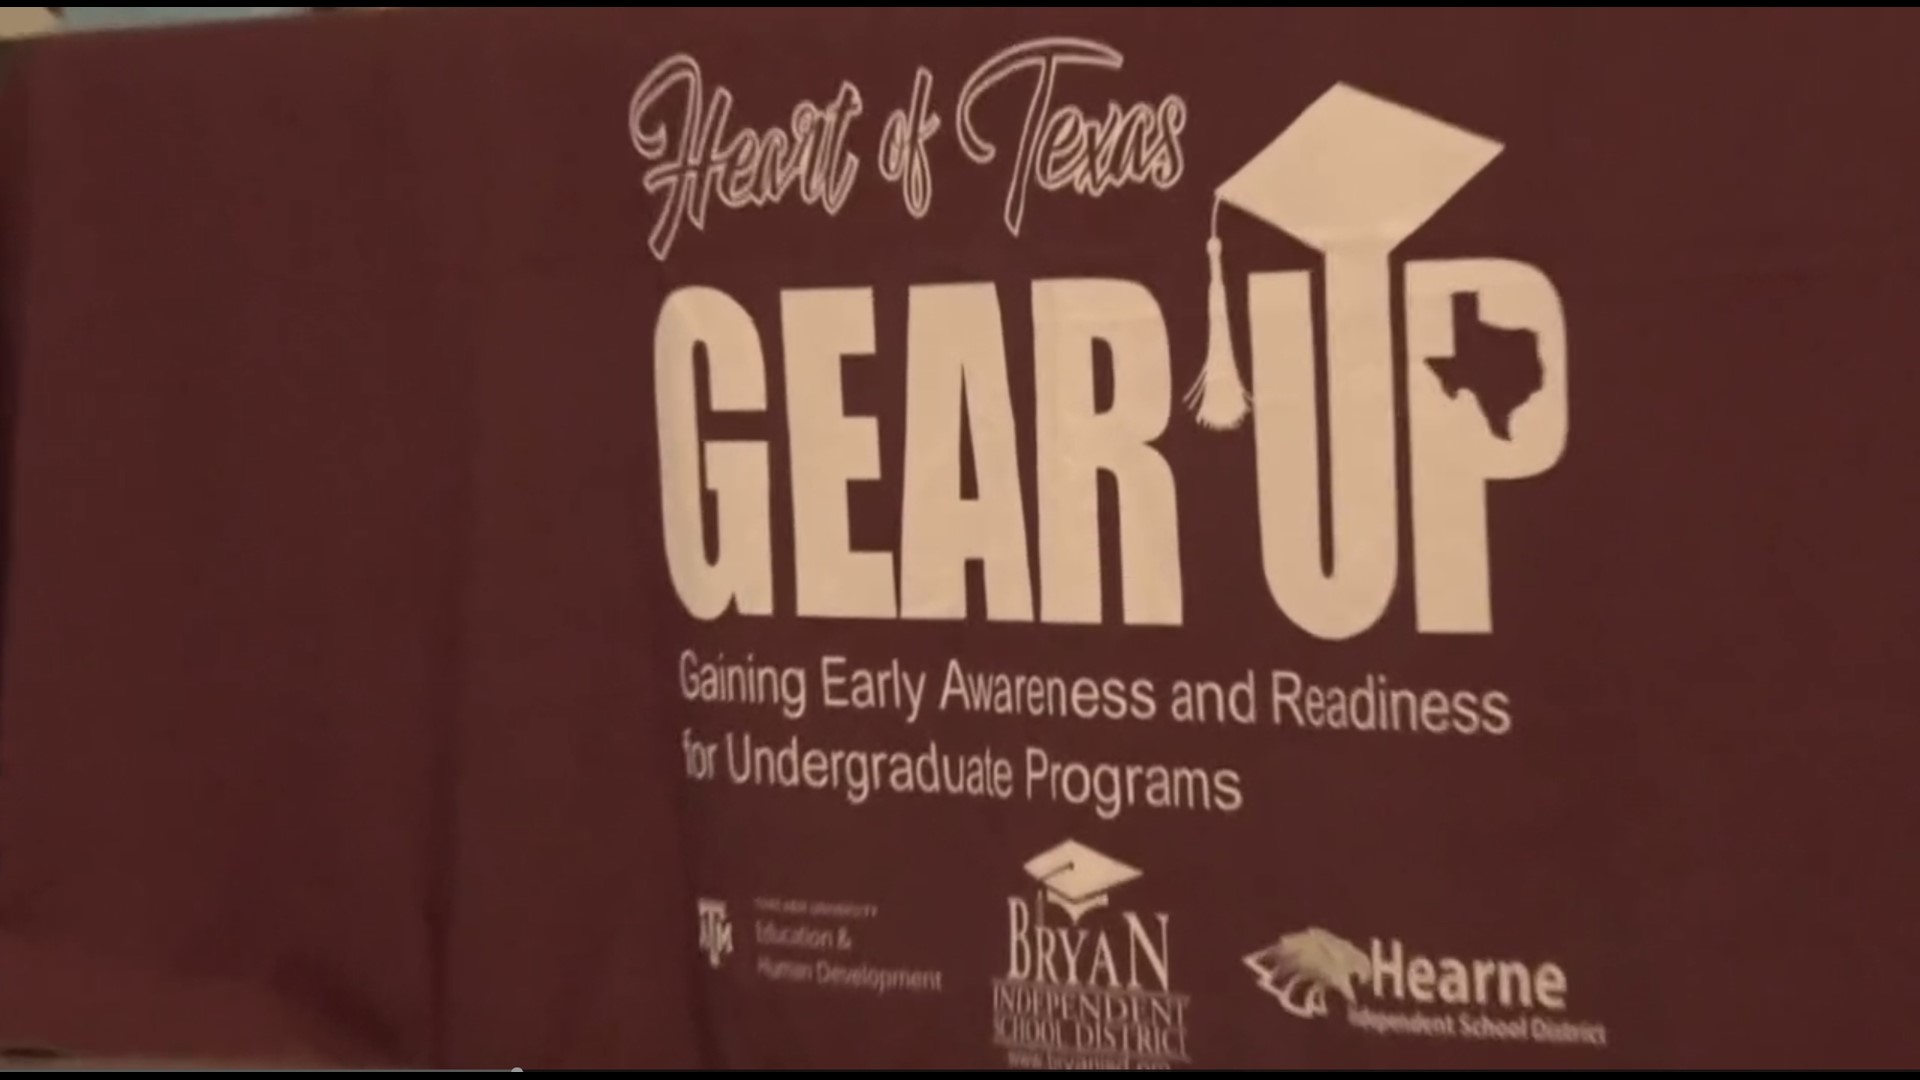 The Gaining Early Awareness and Readiness for Undergraduate Programs (GEAR UP) is a national program meant to help underrepresented students prepare for college.